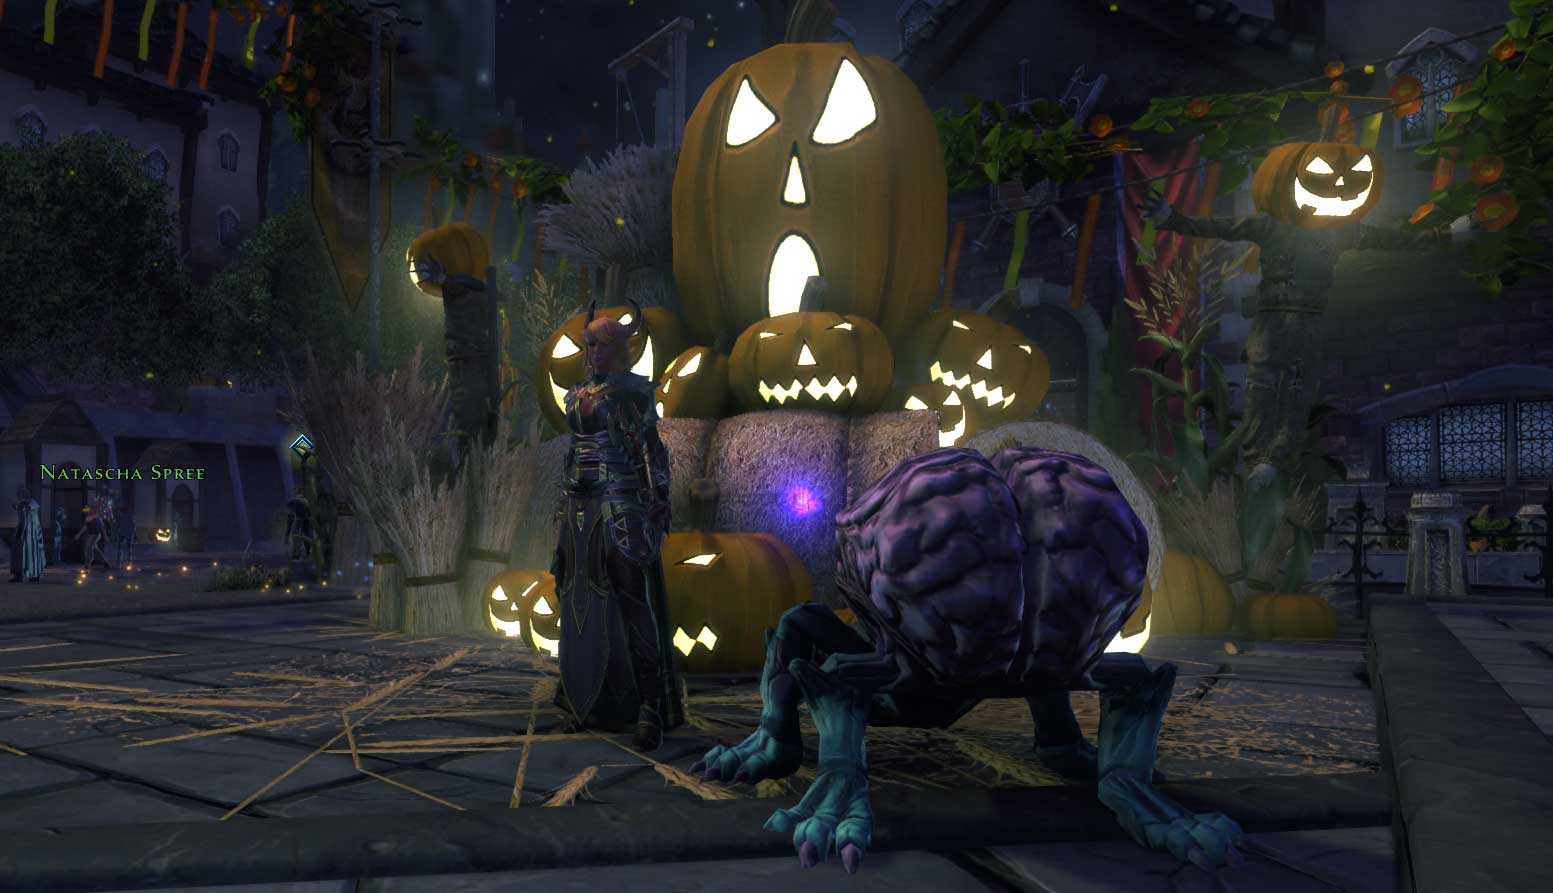 Lucidia from Neverwinter Online, a demonic-looking tiefling, stands in front of some jack o'lanterns and scarecrows -- her pet, Amygdalin, an Intellect Devourer, stands with her.